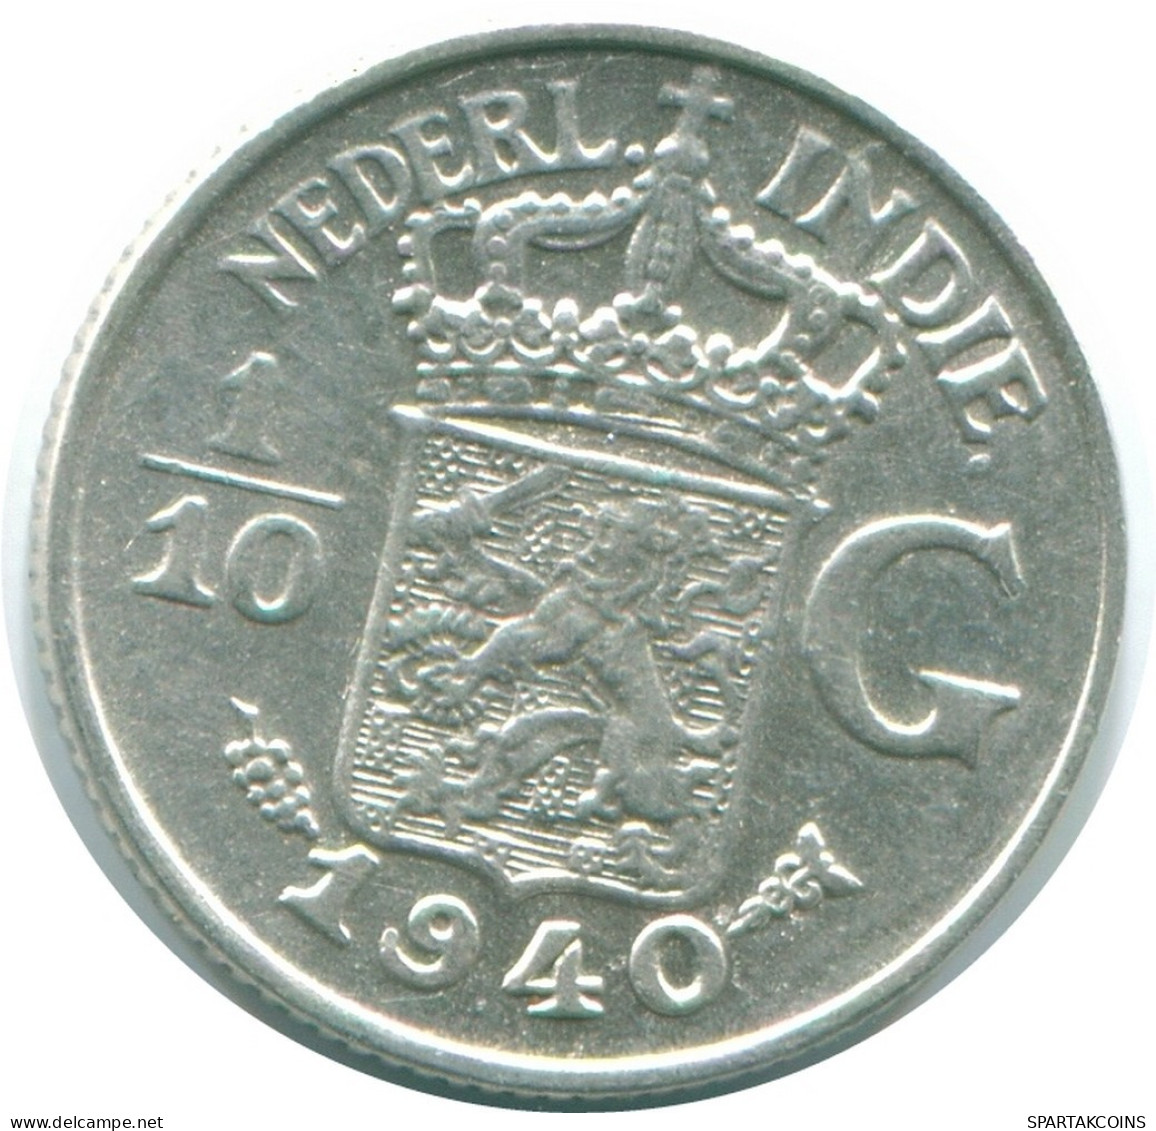 1/10 GULDEN 1940 NETHERLANDS EAST INDIES SILVER Colonial Coin #NL13530.3.U.A - Dutch East Indies